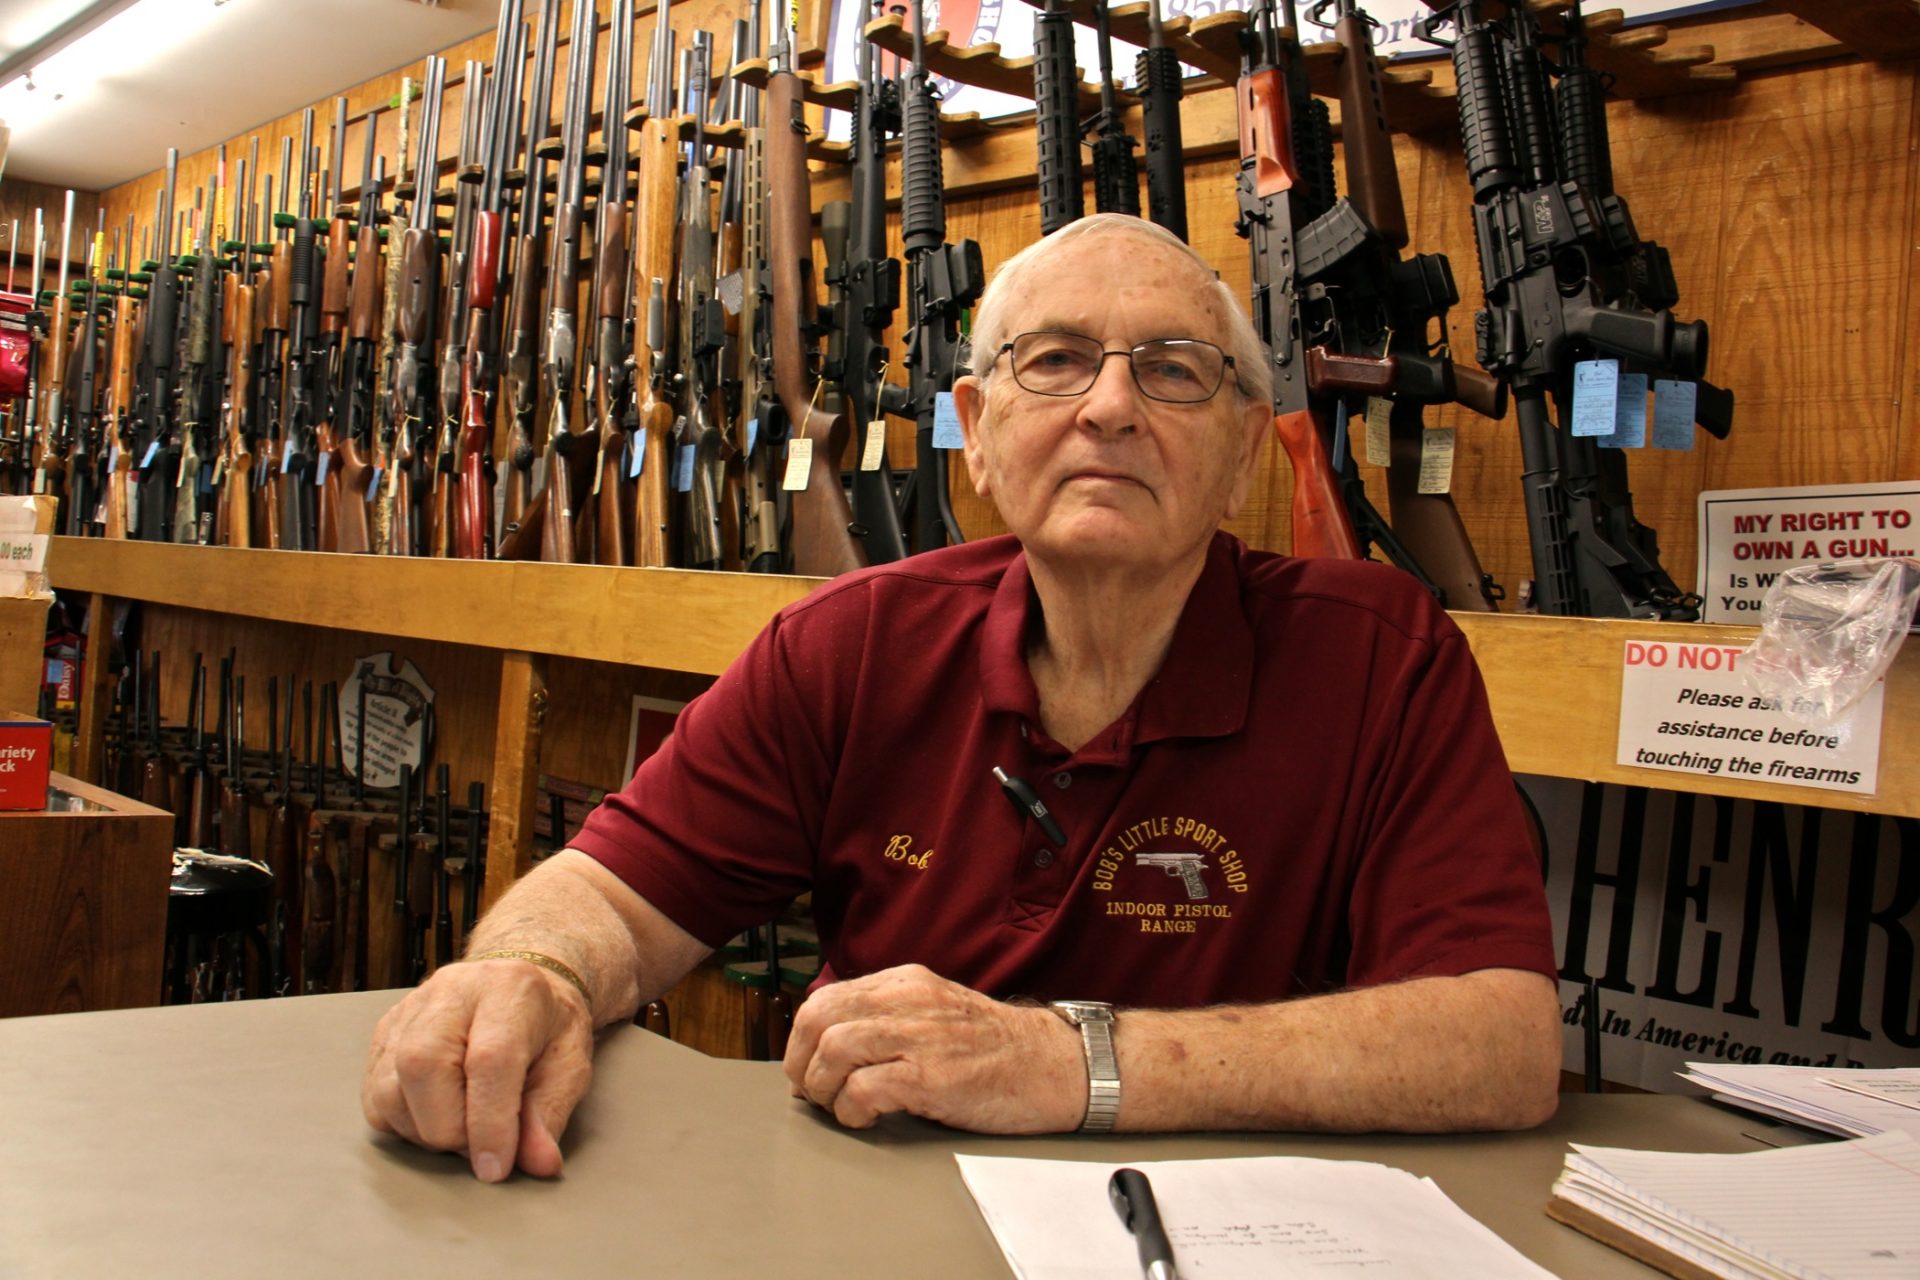 Bob Viden, owner of Bob's Little Sport Shop in Glassboro, says his shop will continue selling the ammunition that Walmart has decided to drop from its inventory.